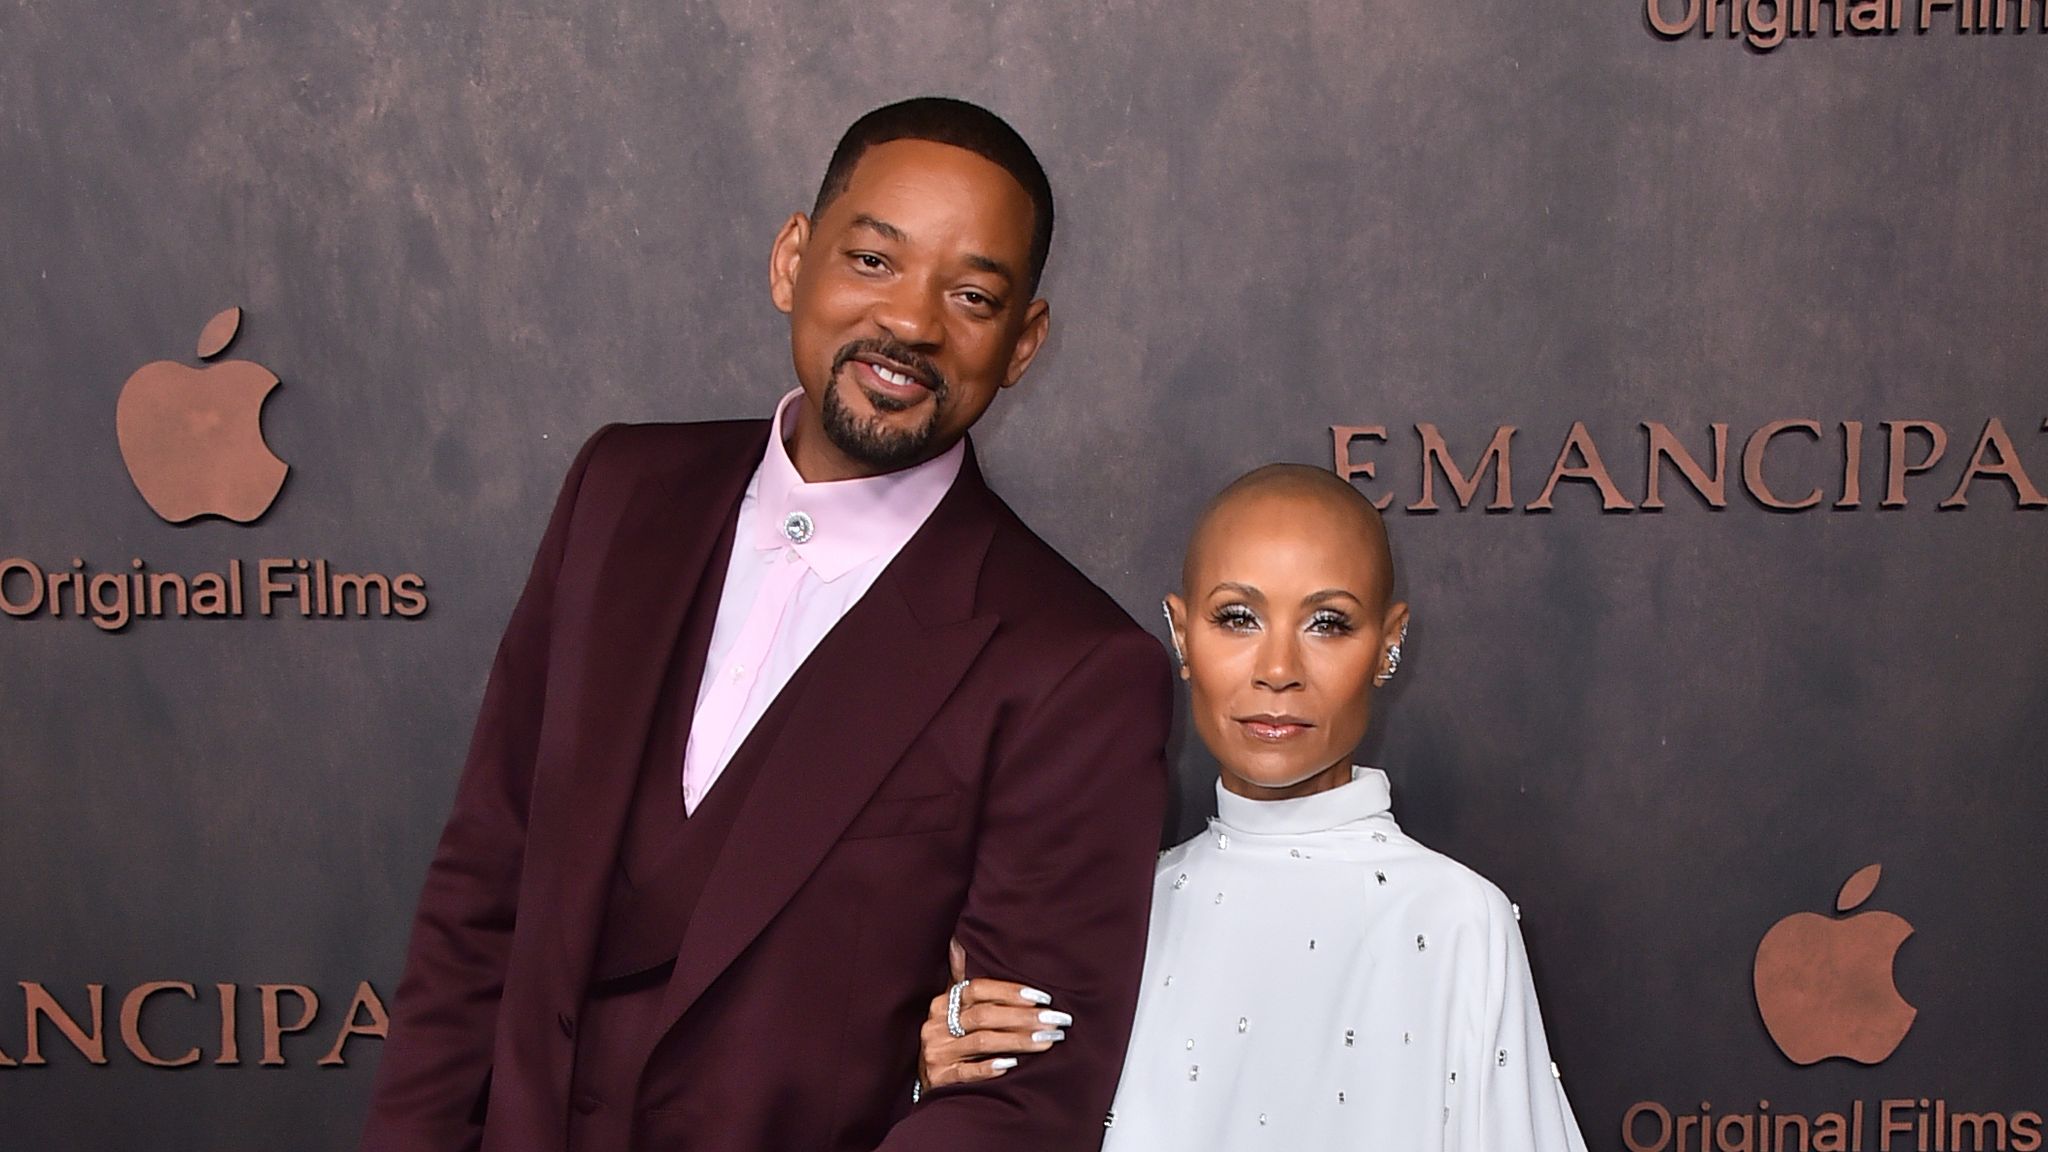 Jada Pinkett Smith and Will Smith 'healing the relationship' after revealing separation | Ents & Arts News | Sky News